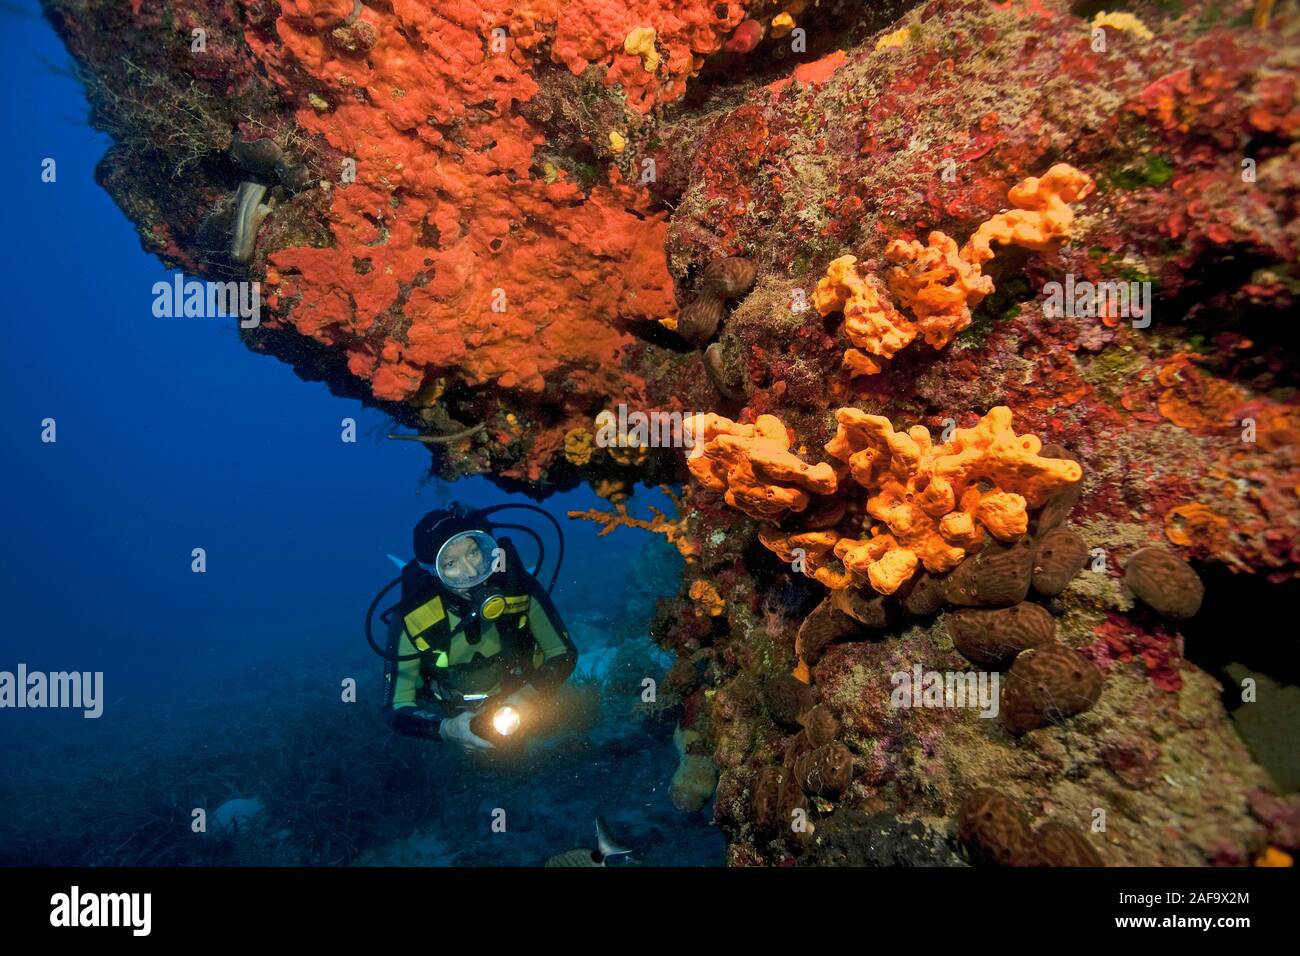 Scuba diver at a rocky reef with red mediteranean sponges (Spirastrellidae), Bodrum, Turkey Stock Photo